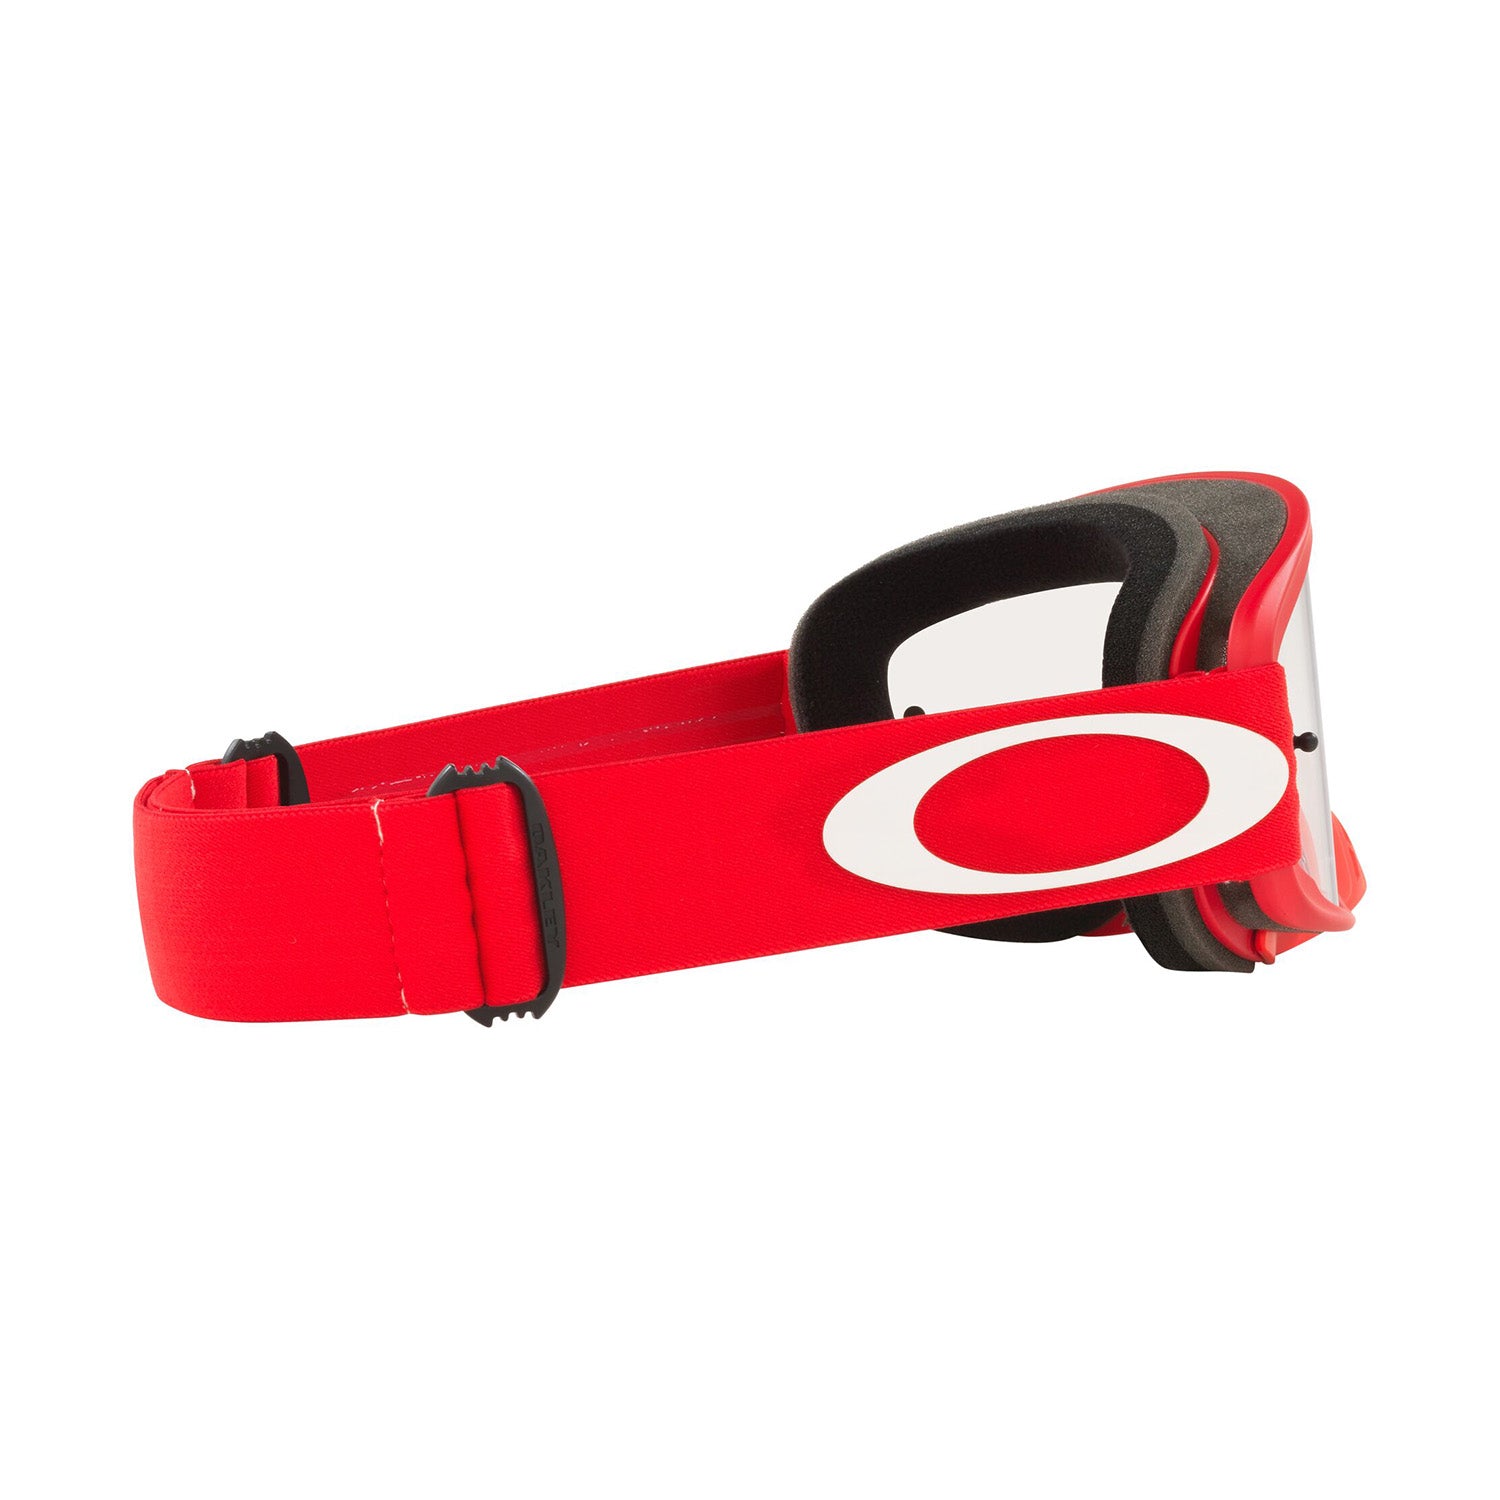 Oakley O Frame 2.0 Pro MX Goggle Moto Red - Clear Lens